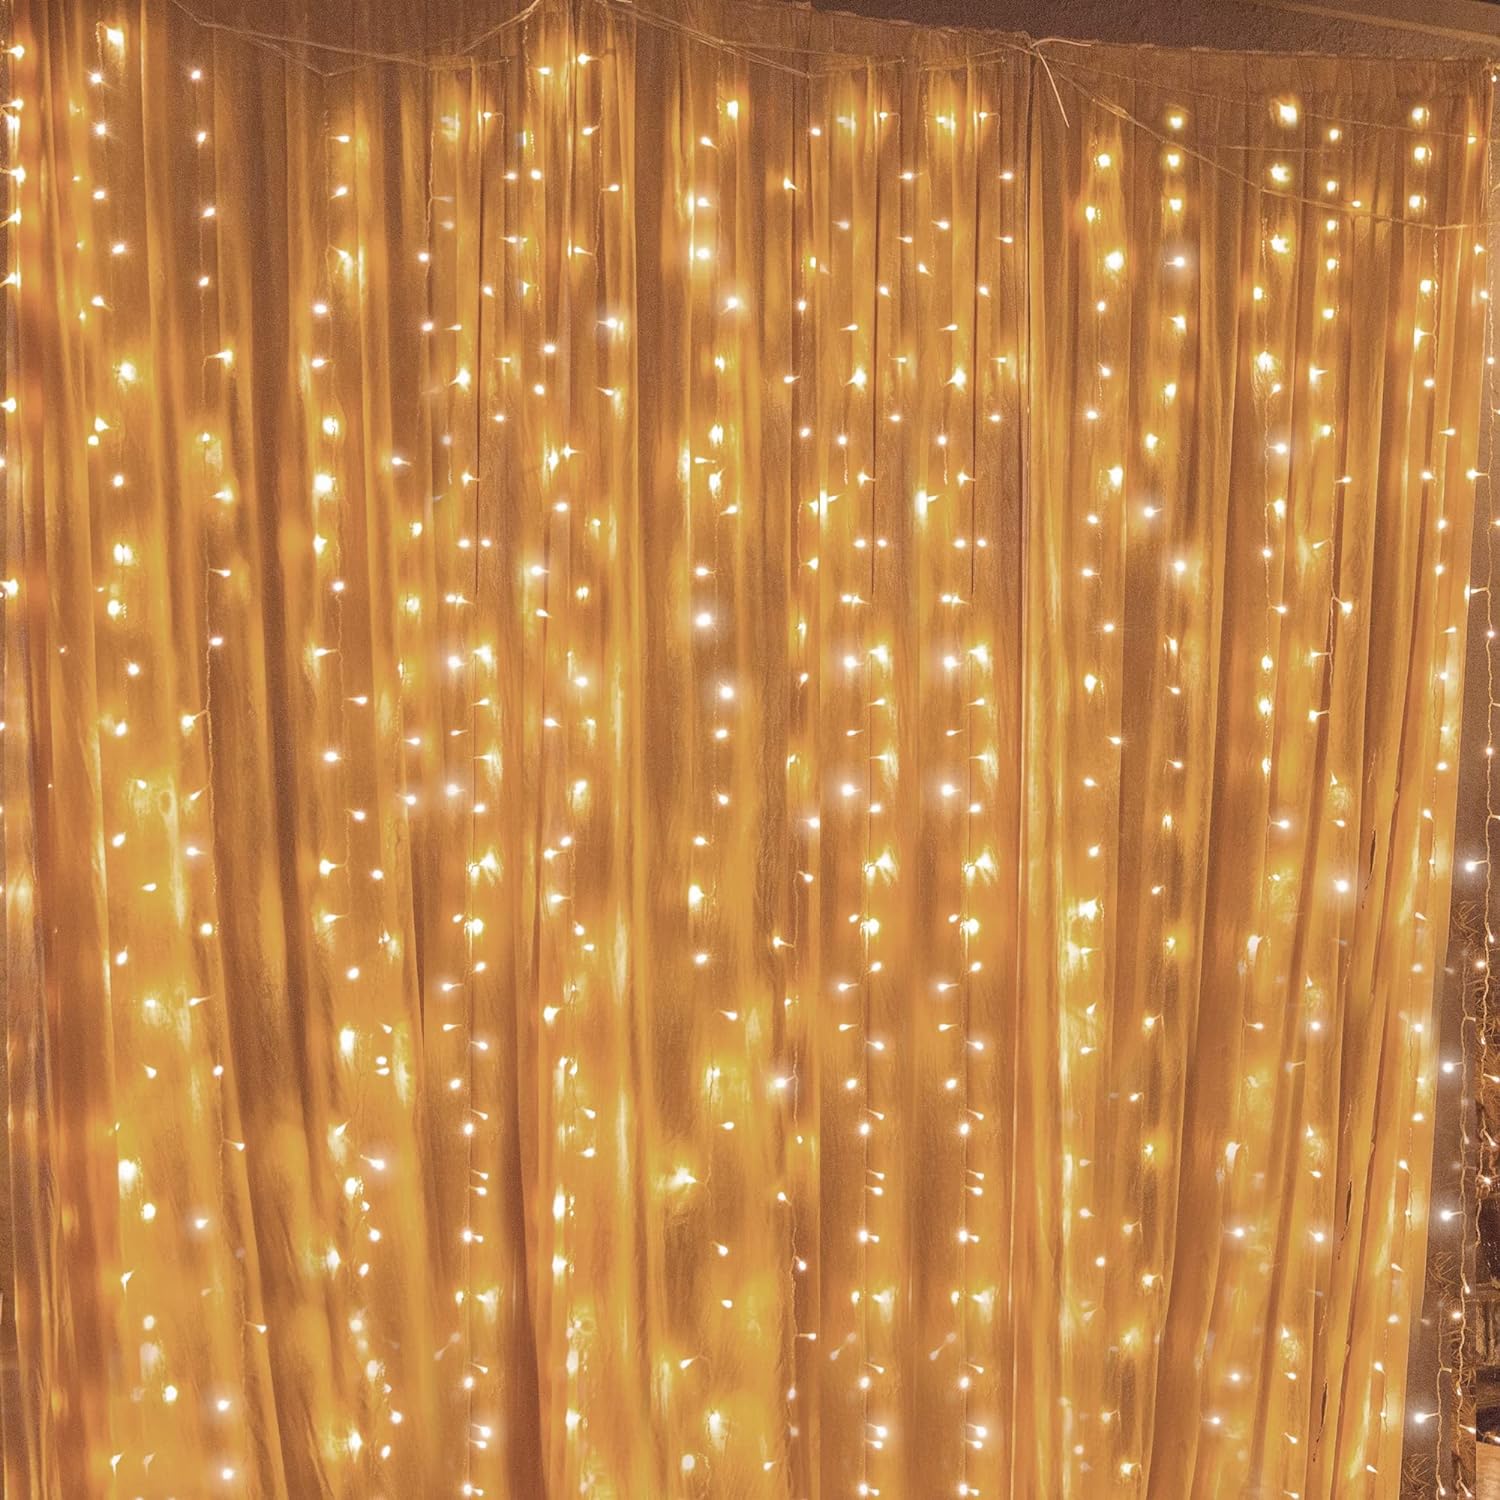 Twinkle Star 300 LED Window Fairy Curtain String Lights, 8 Modes Fairy Lights for Wedding Party Home Garden Bedroom Outdoor Indoor Wall Decorations, Warm White